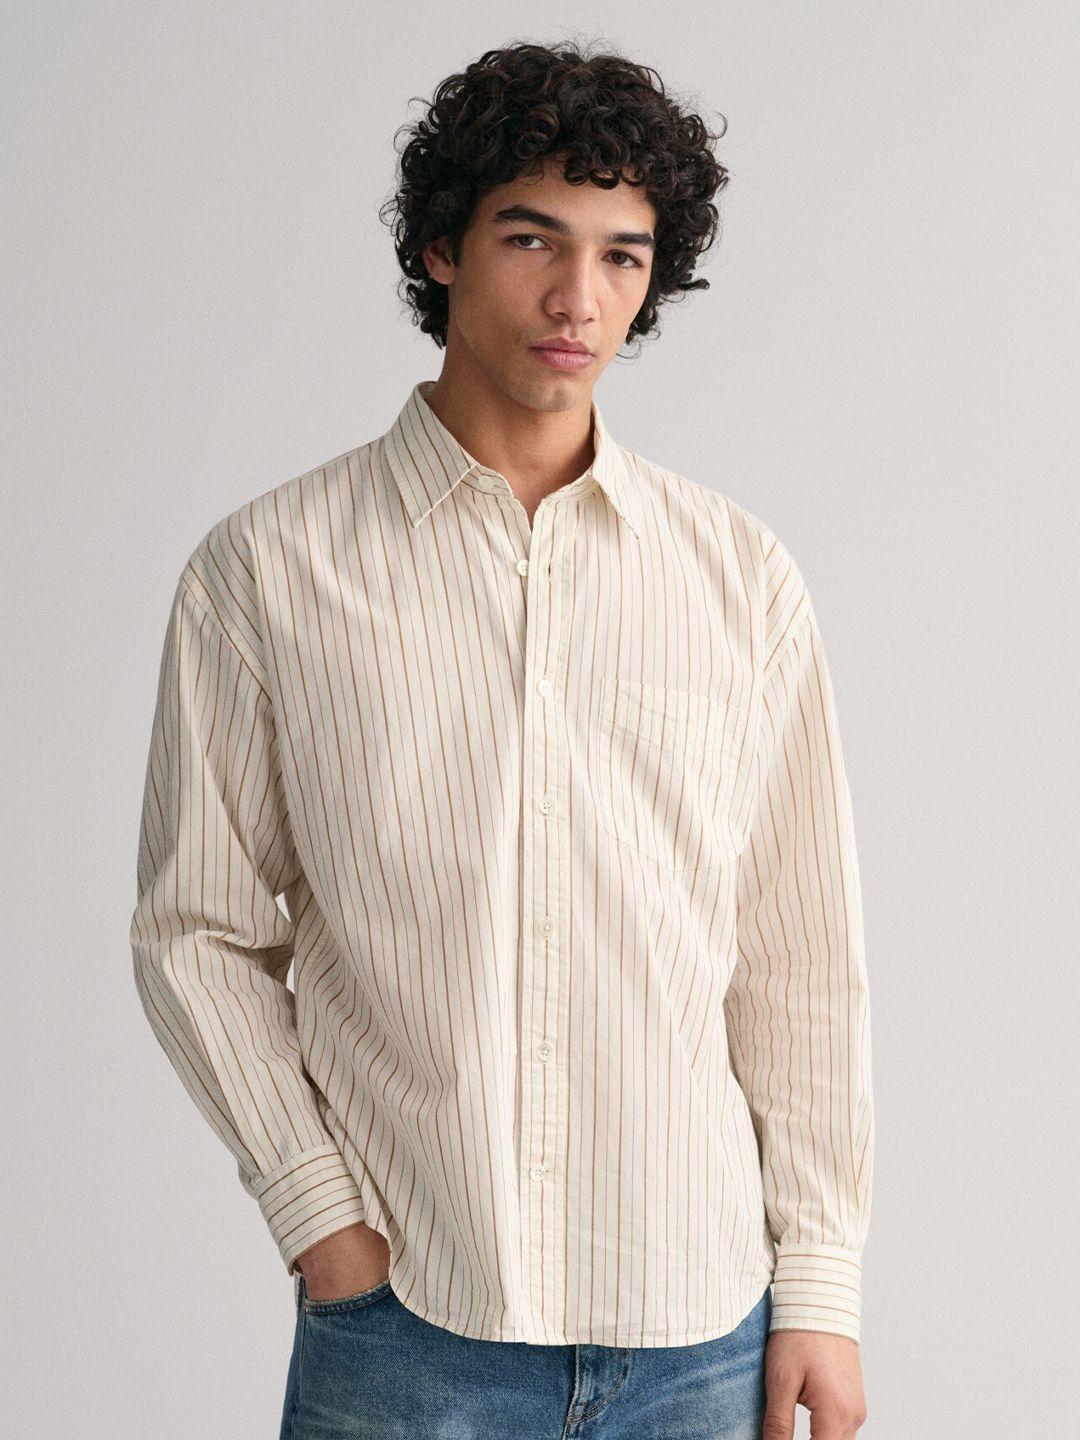 gant-oversized-striped-spread-collar-long-sleeves-casual-pure-cotton-shirt